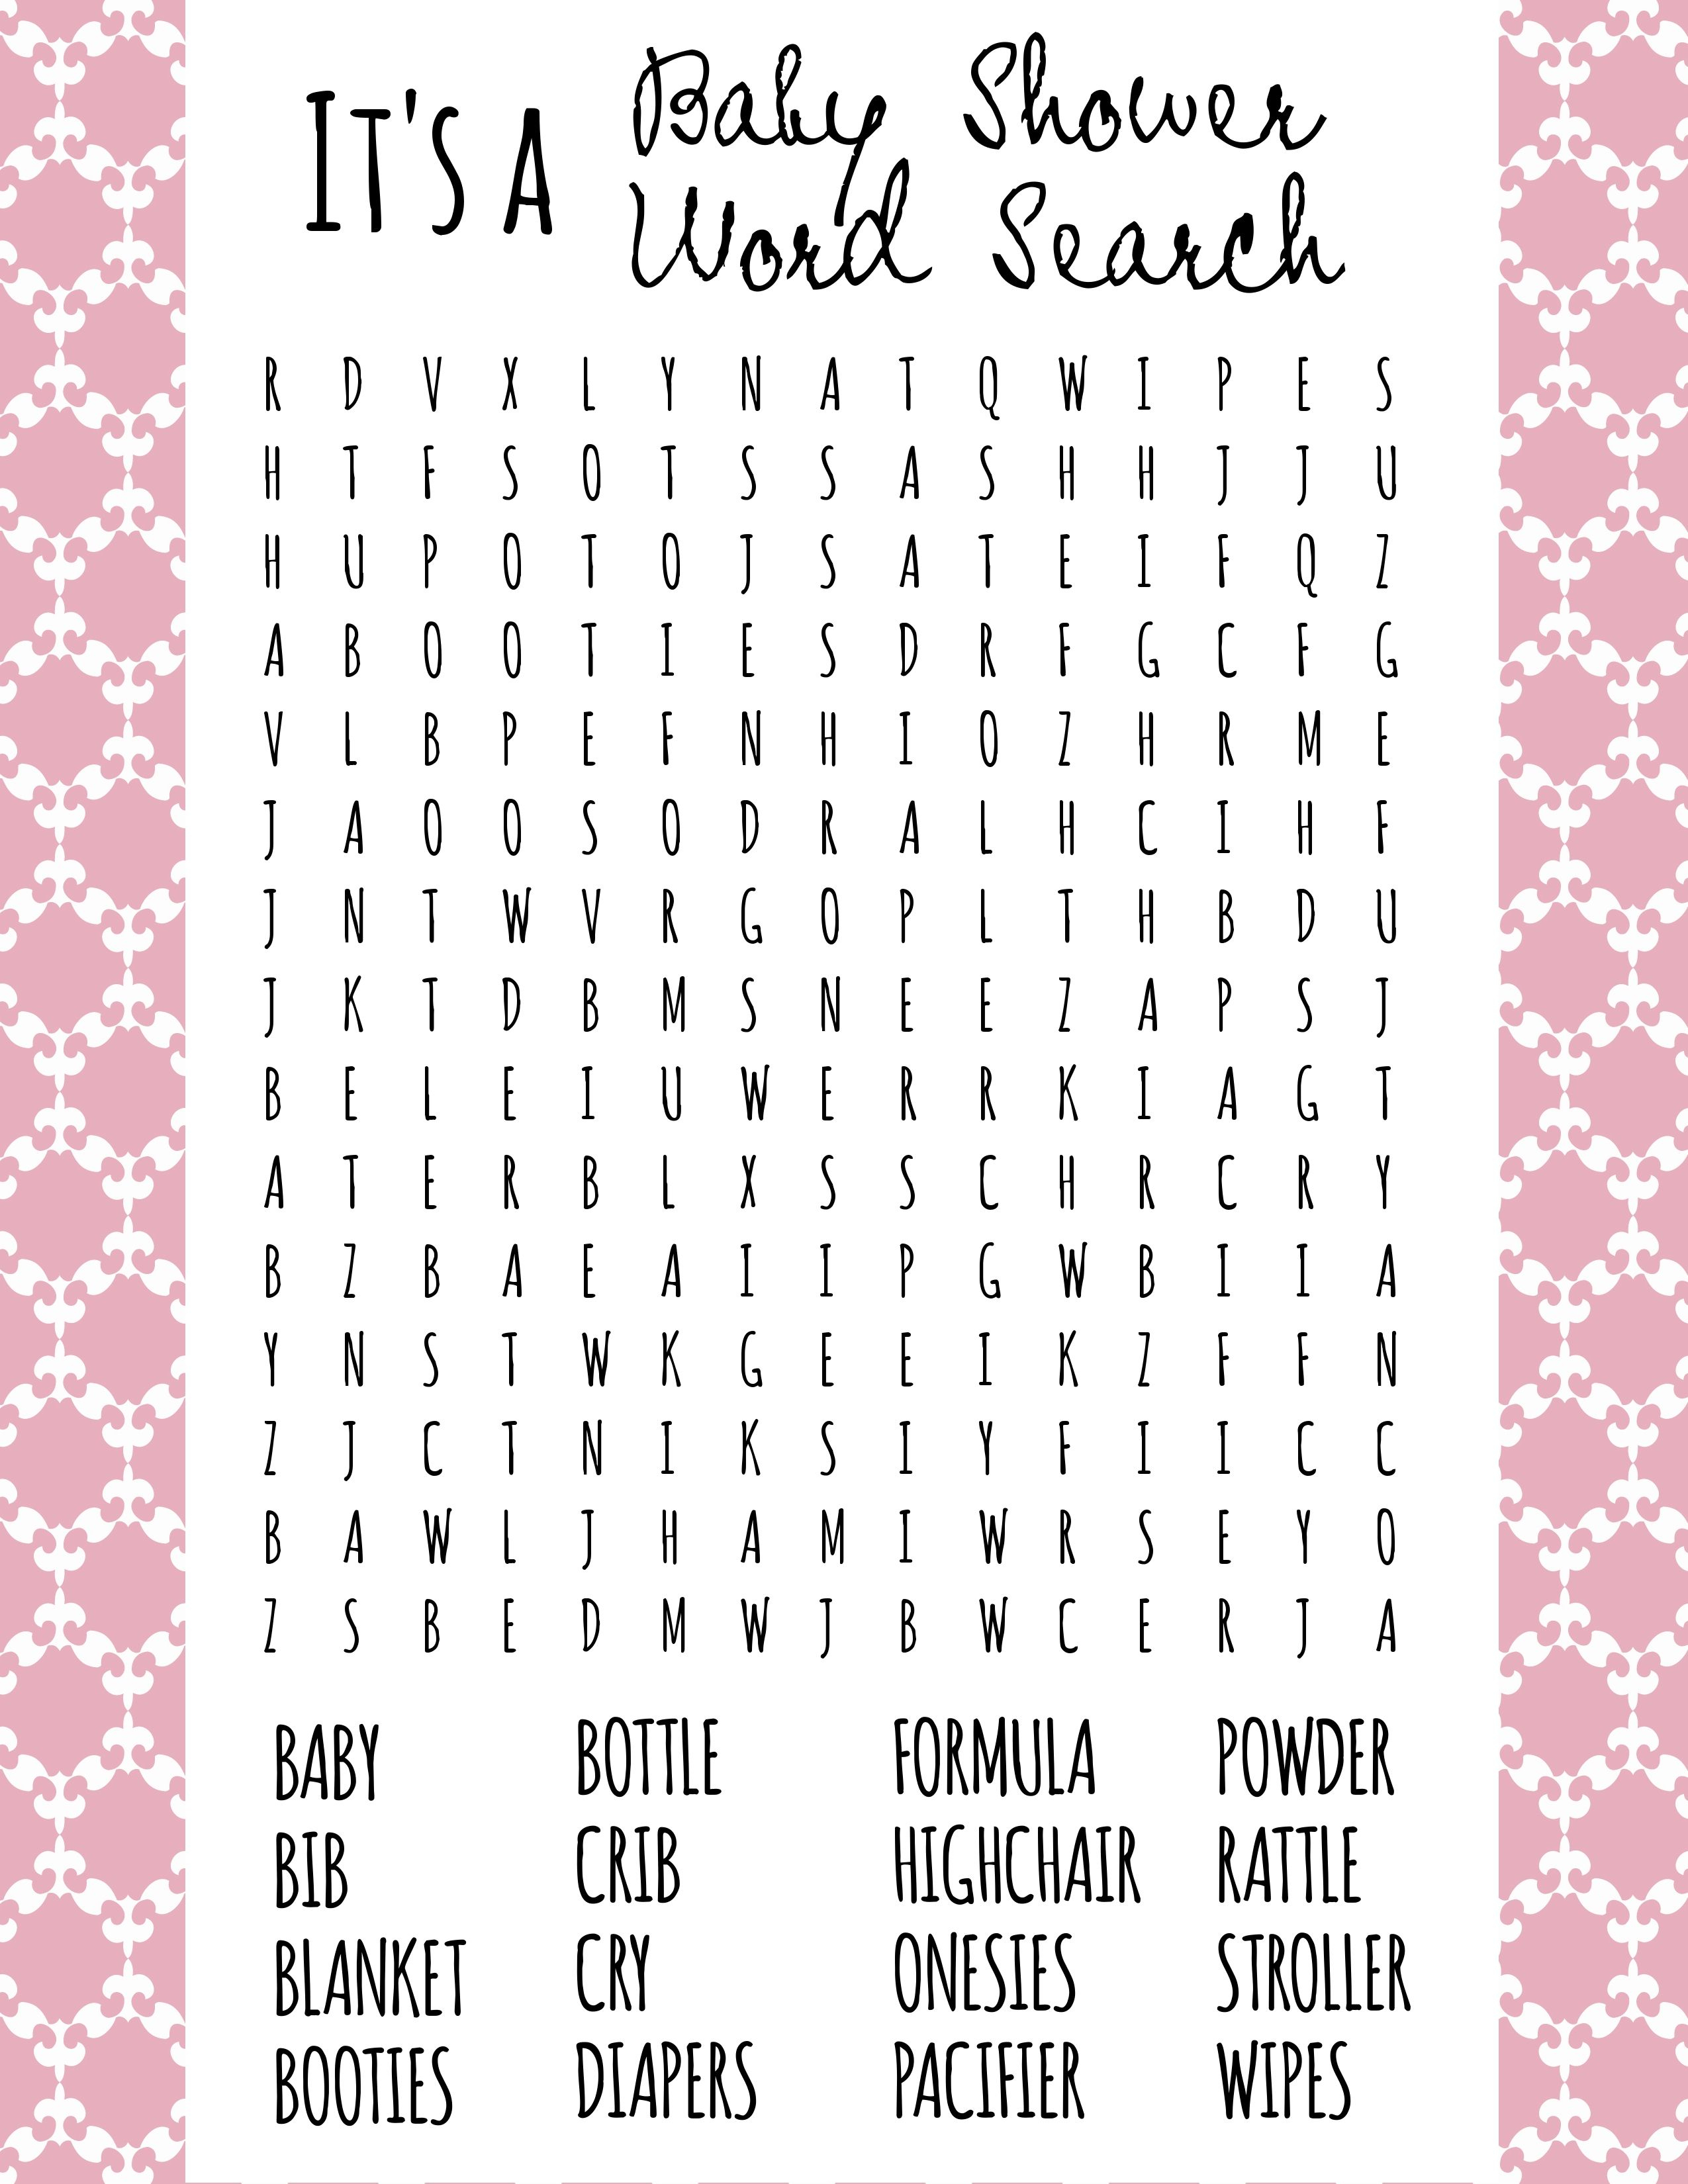 Baby Shower Word Search | Baby Showers | Baby Shower Printables - Free Printable Baby Shower Word Search